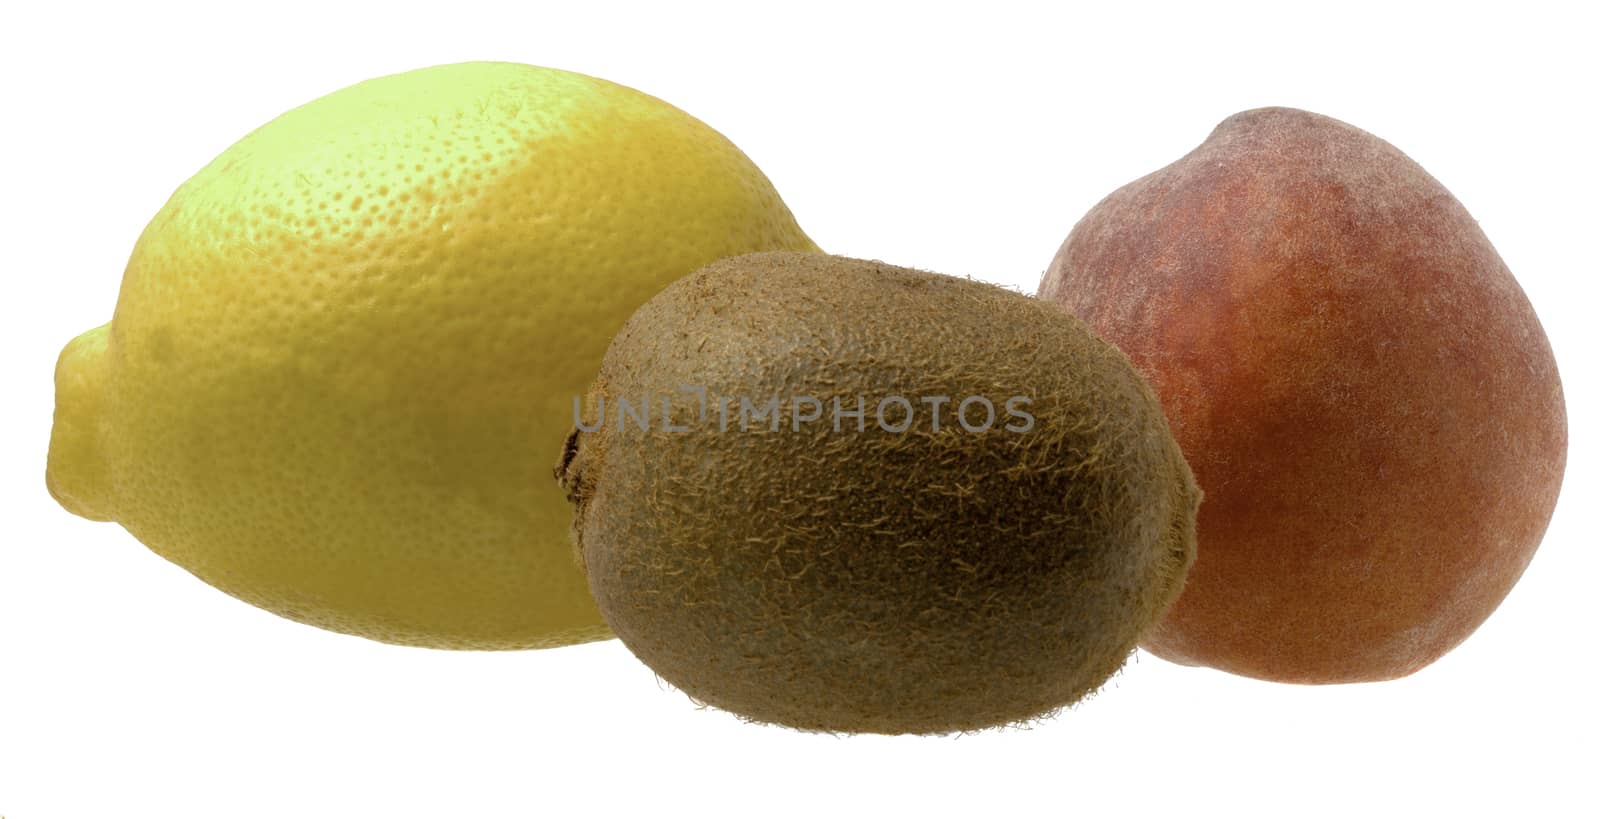 Peach, Kiwi and Lemon isolated on white background by gstalker